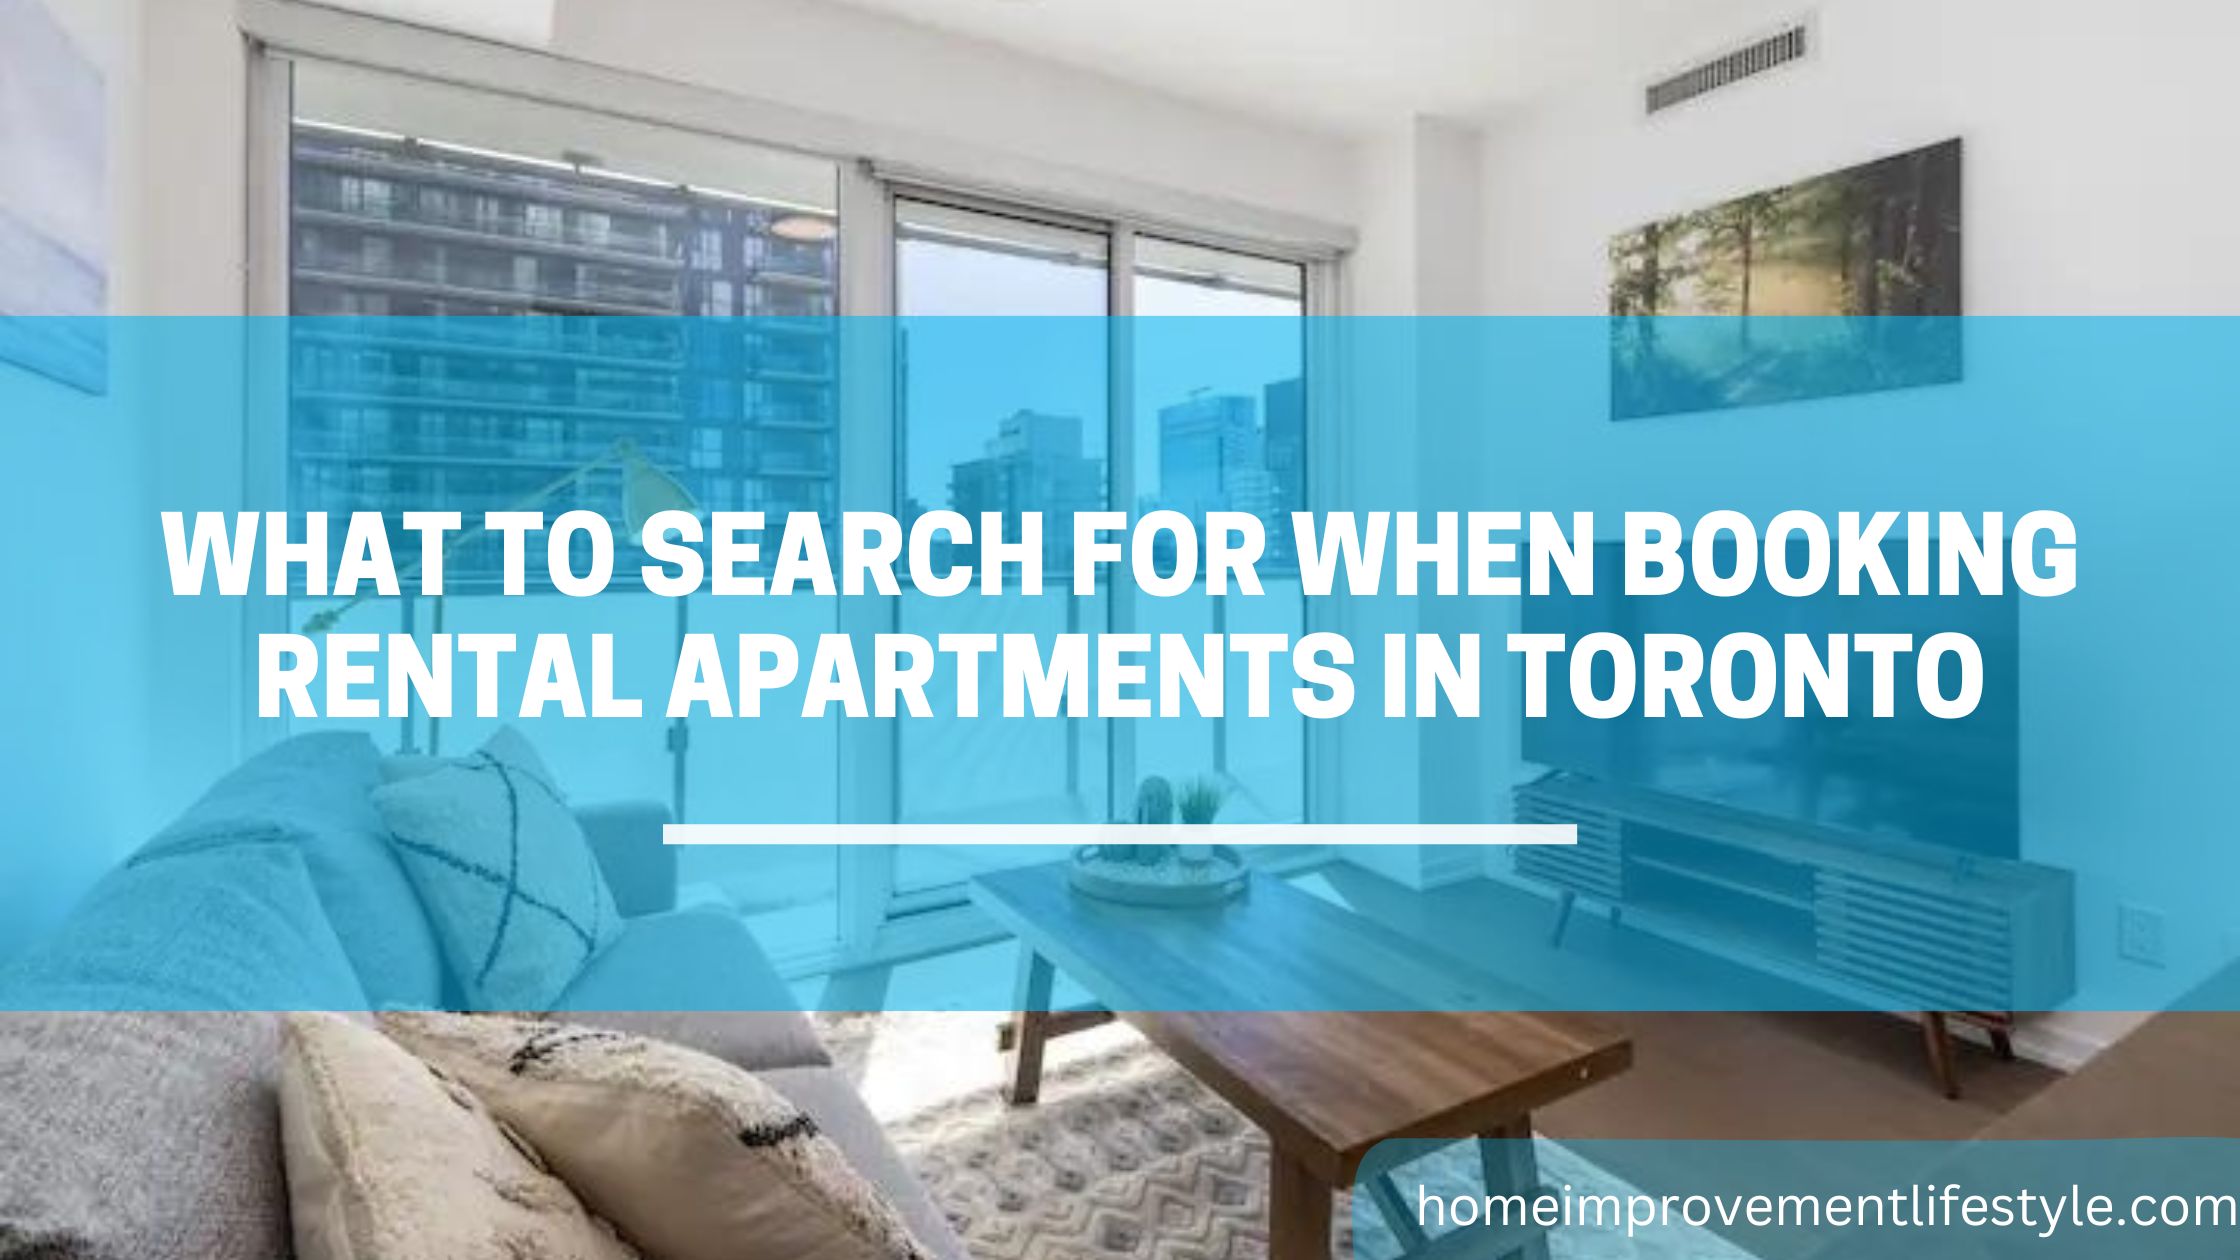 What to Search for When Booking Rental Apartments in Toronto